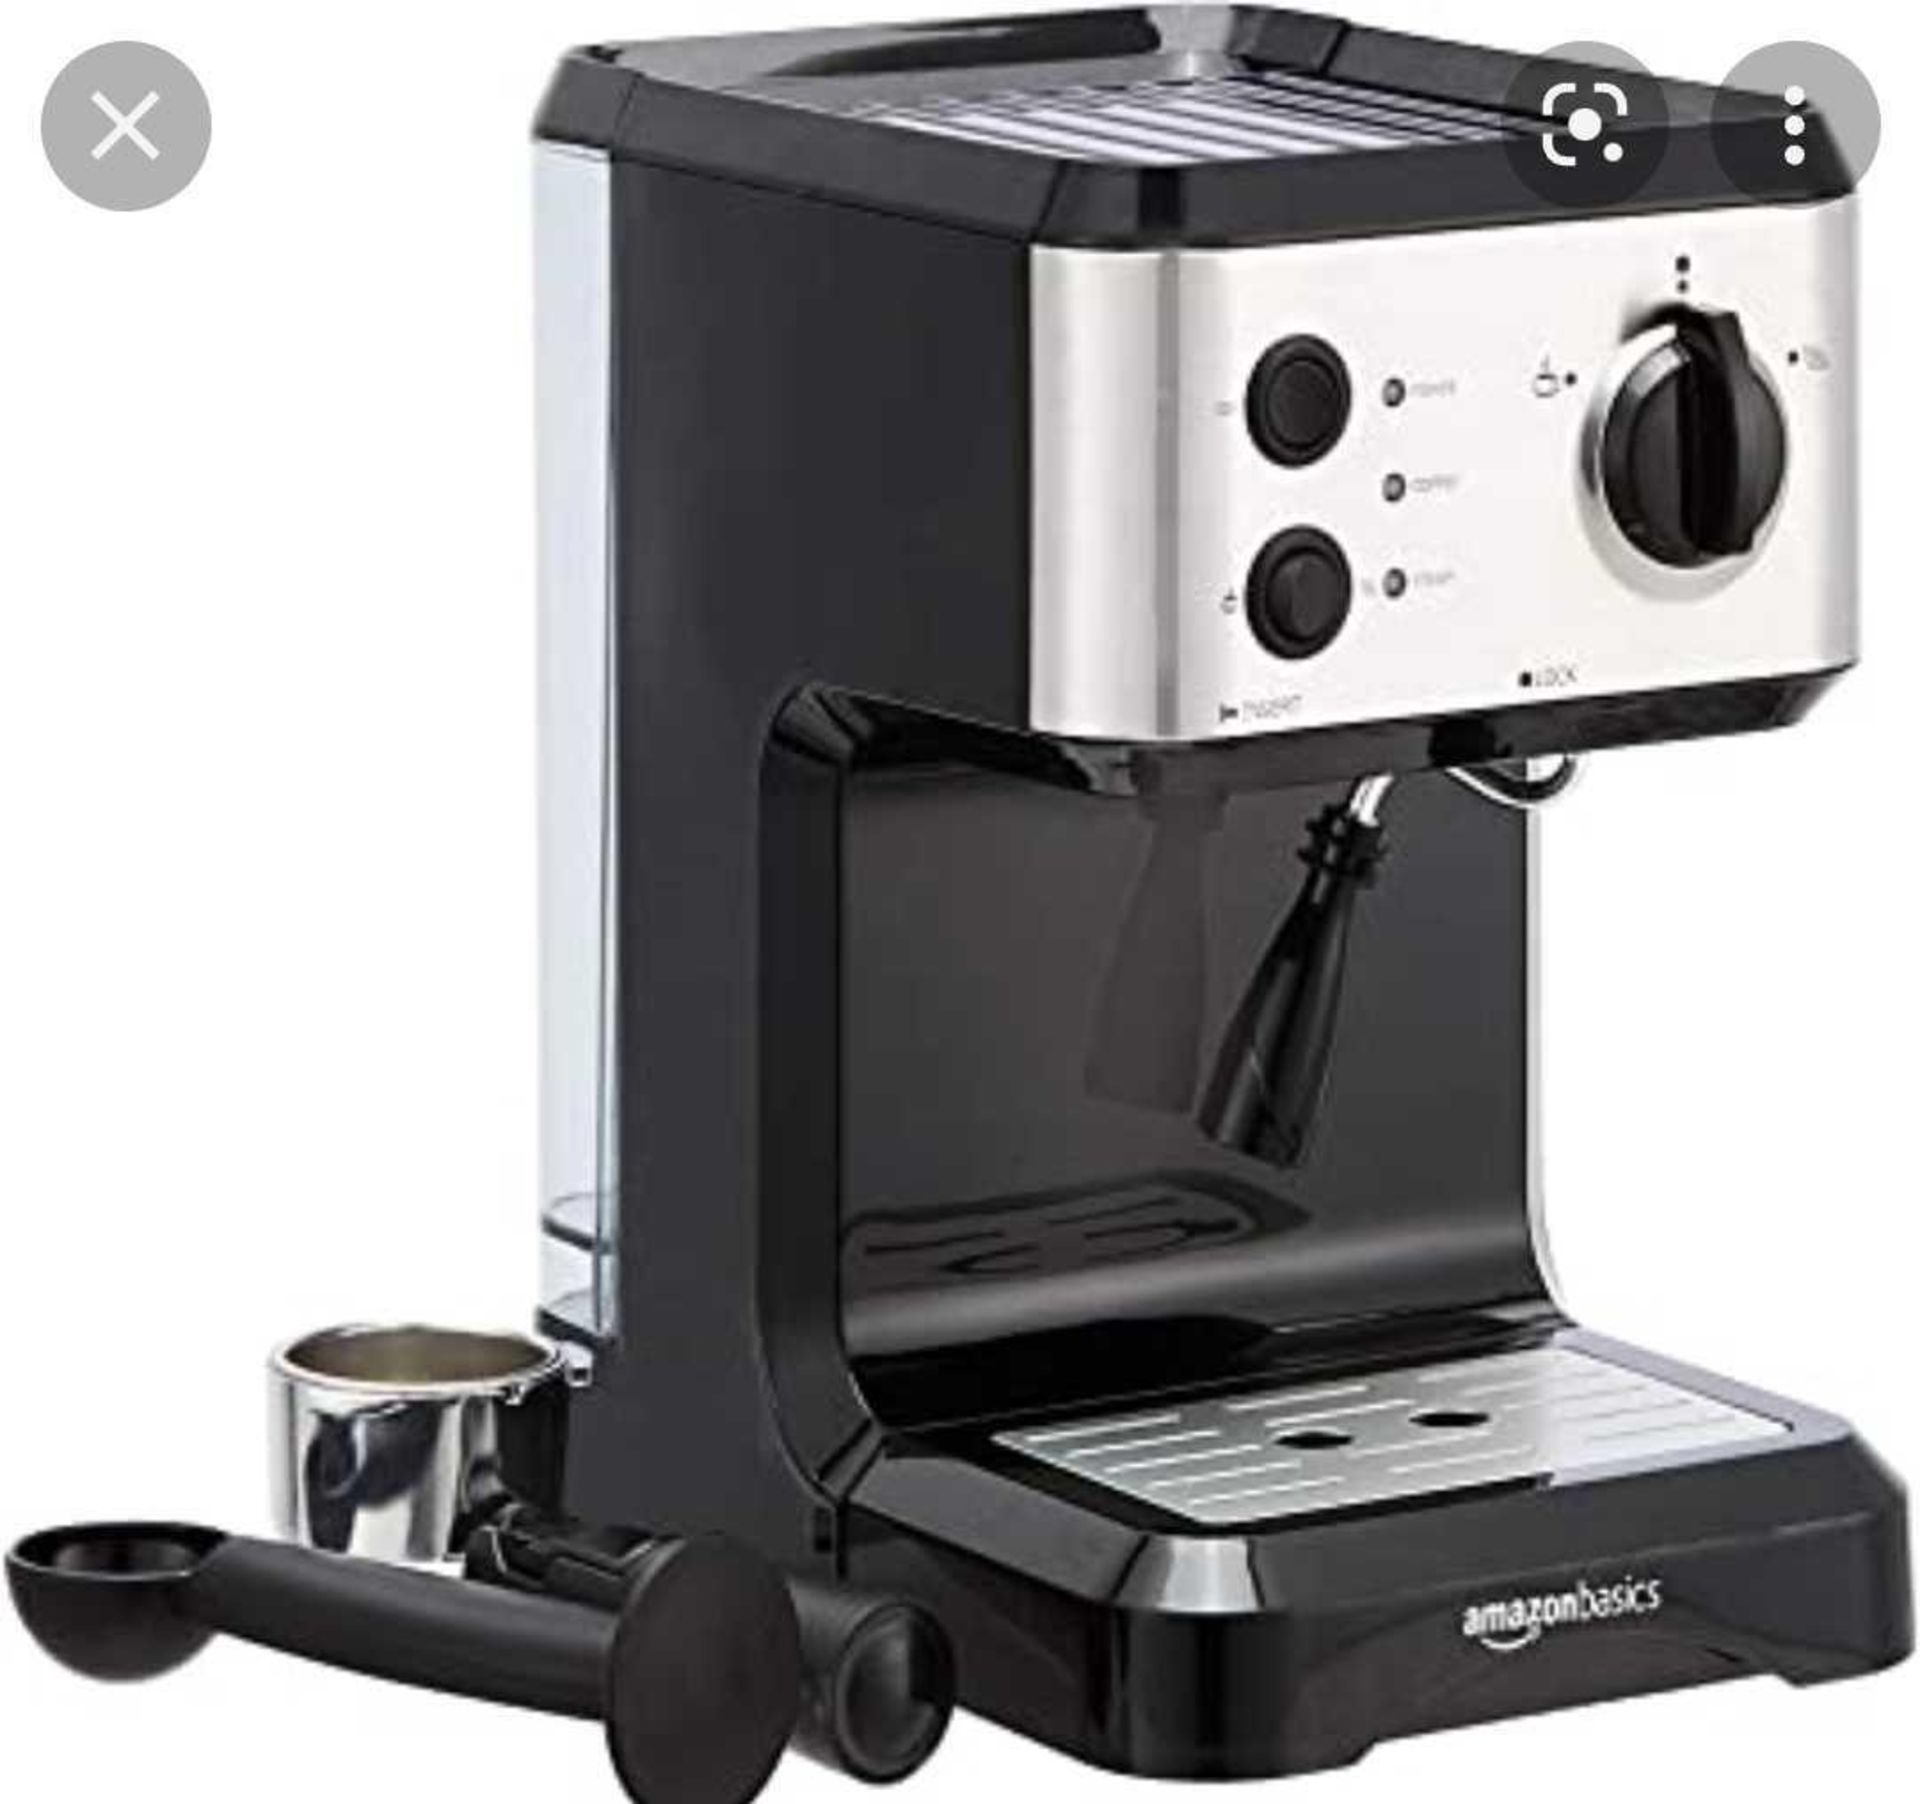 RRP £100 Boxed Brand New Espresso Coffee Machine With Milk Frother